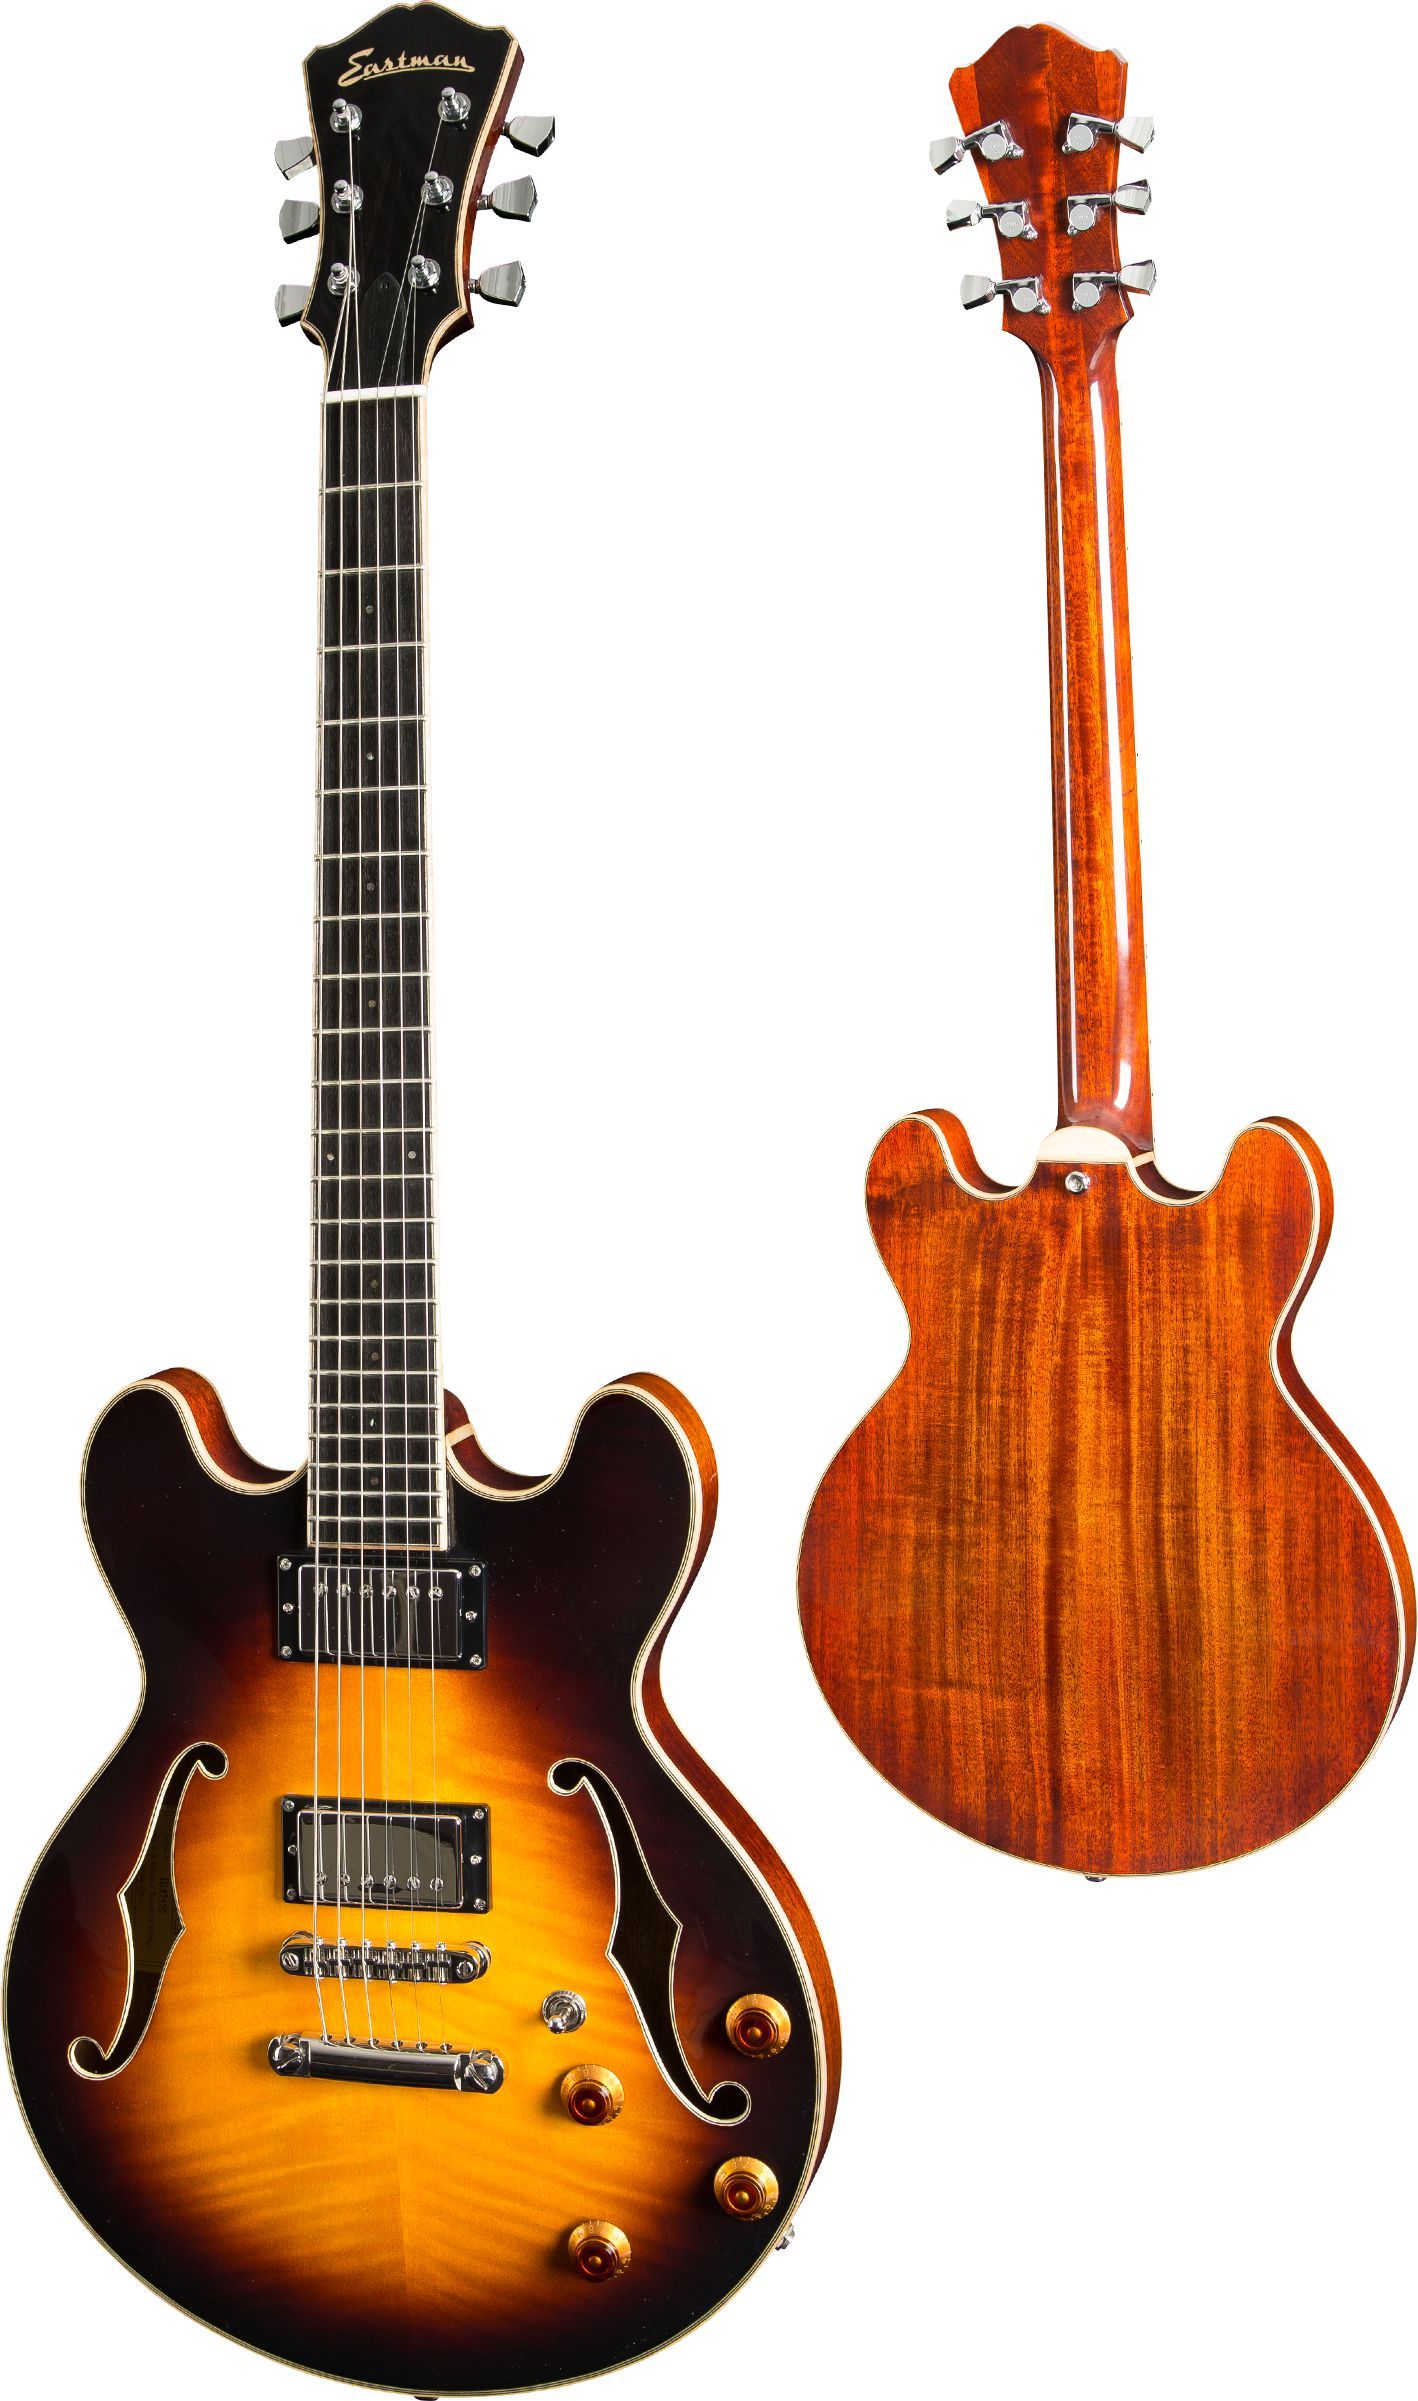 Eastman T184mx SB, Electric Guitar for sale at Richards Guitars.